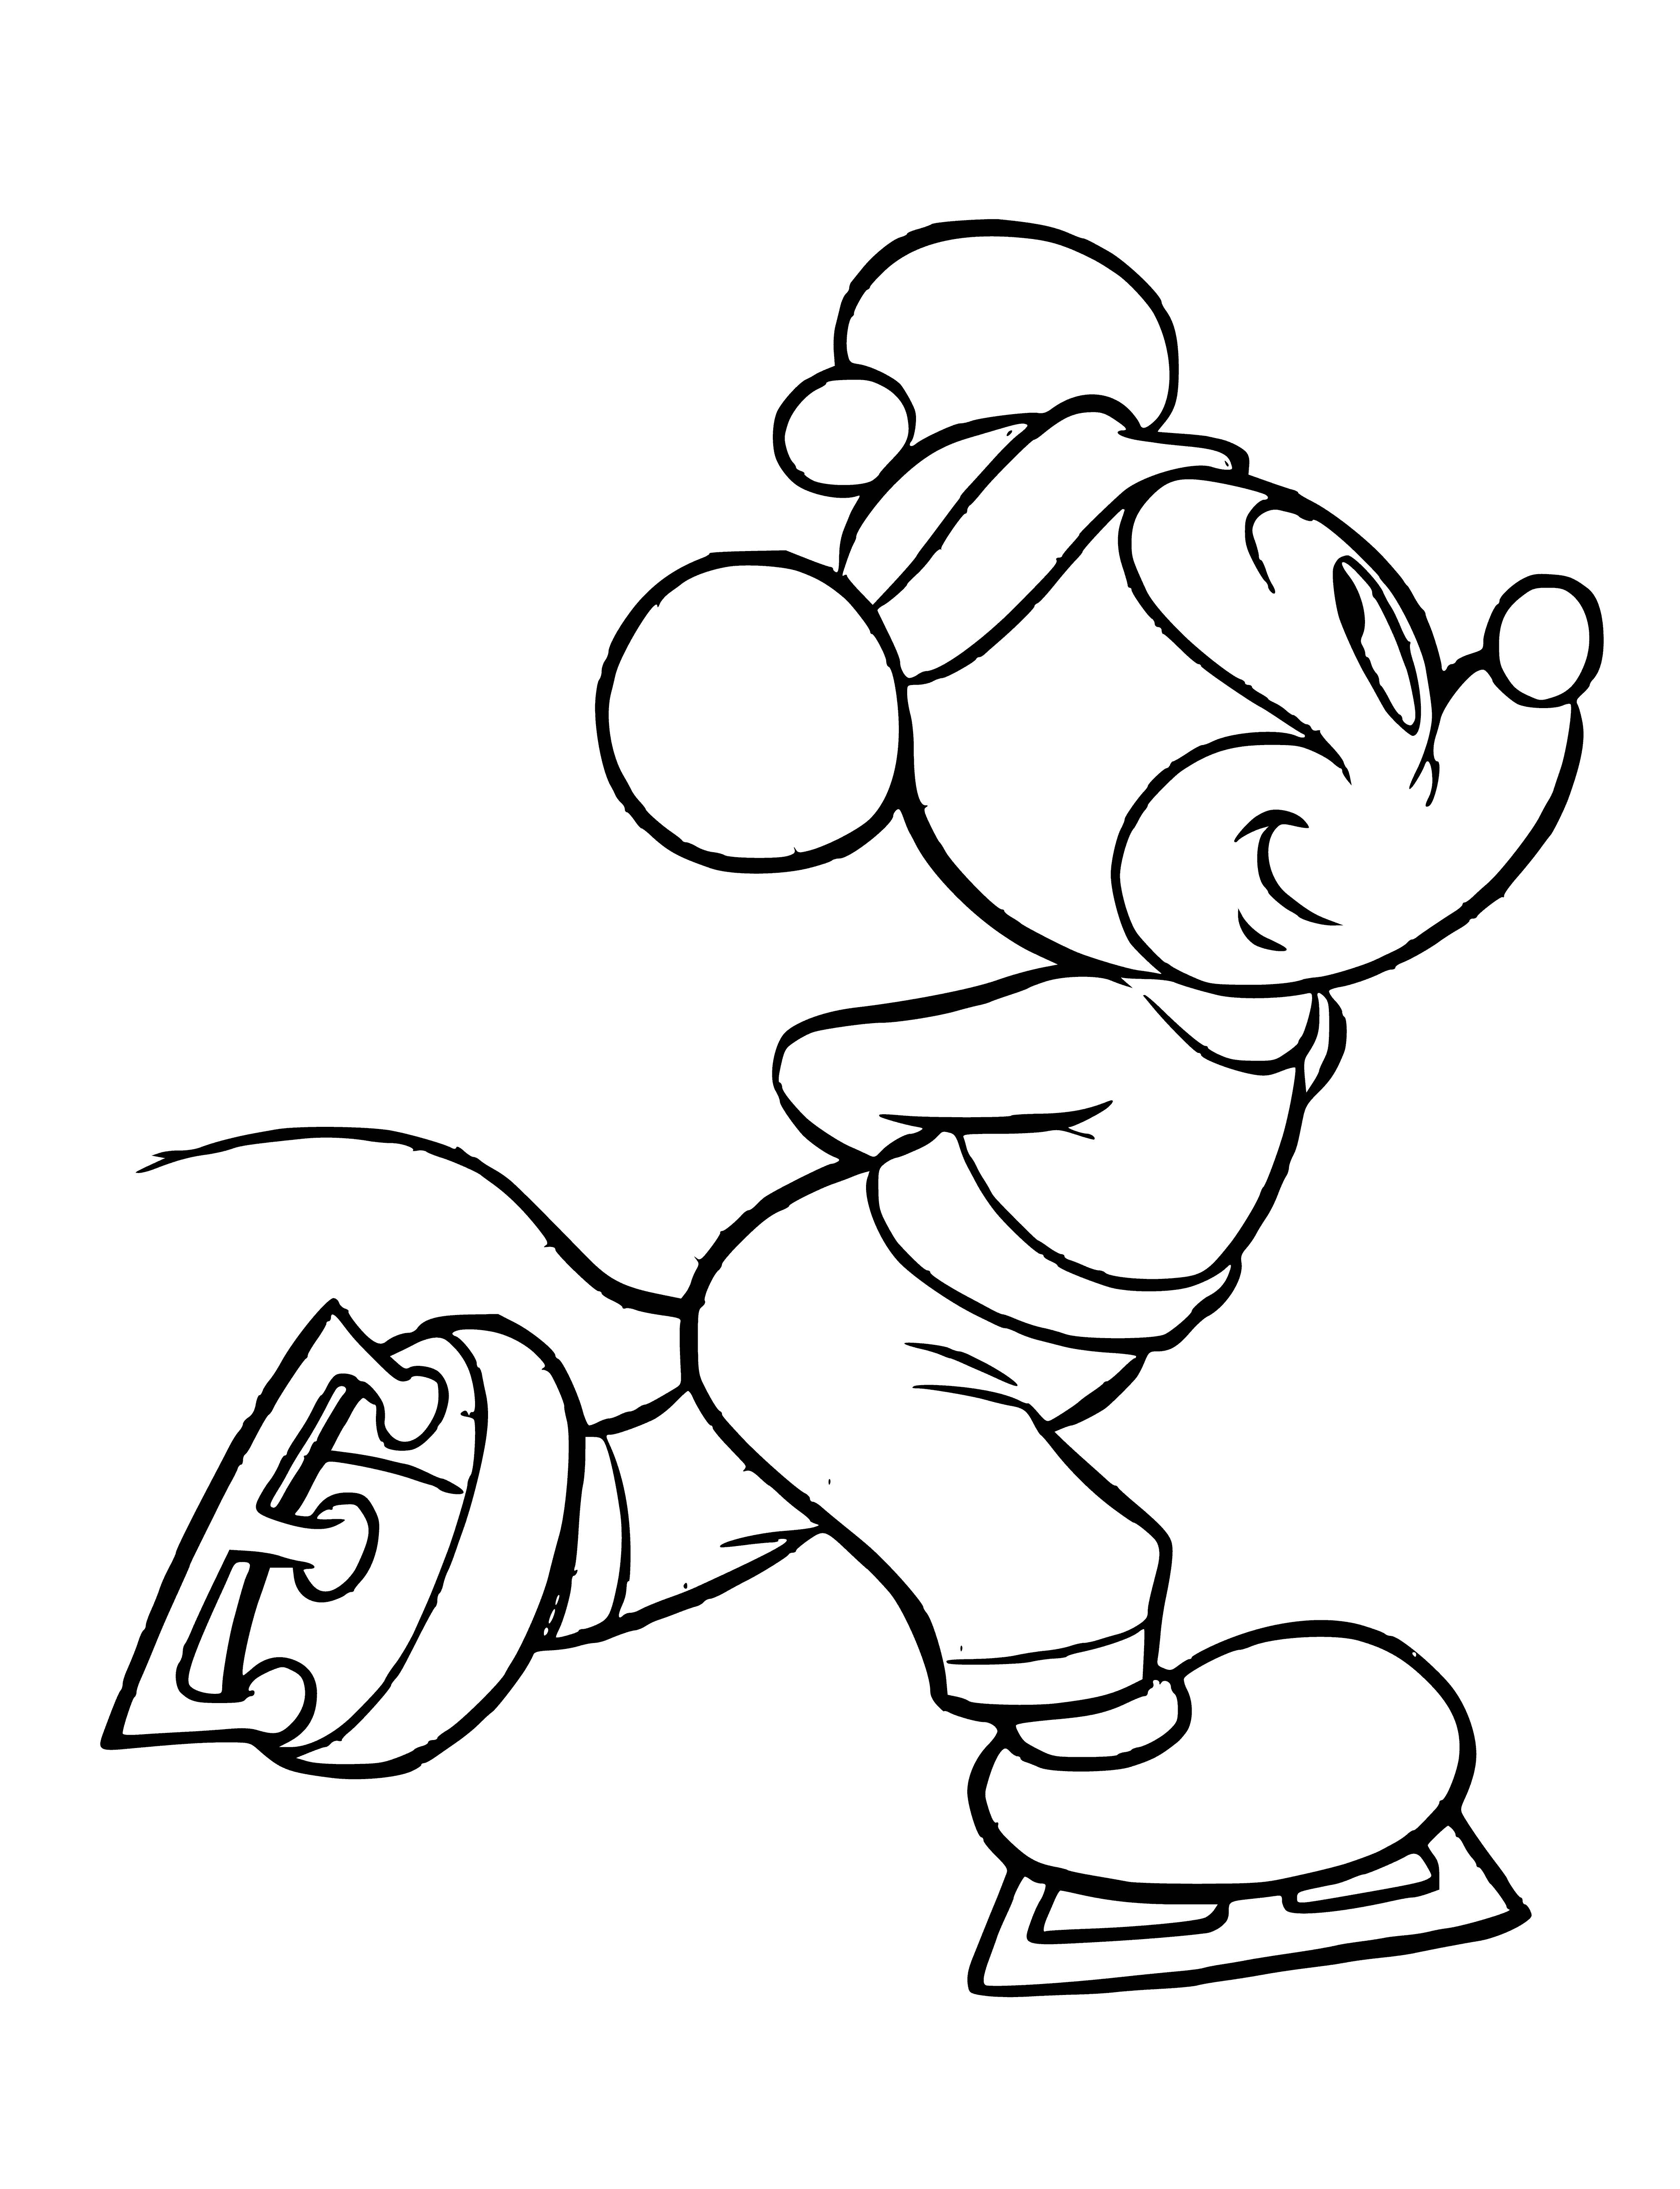 On skates coloring page